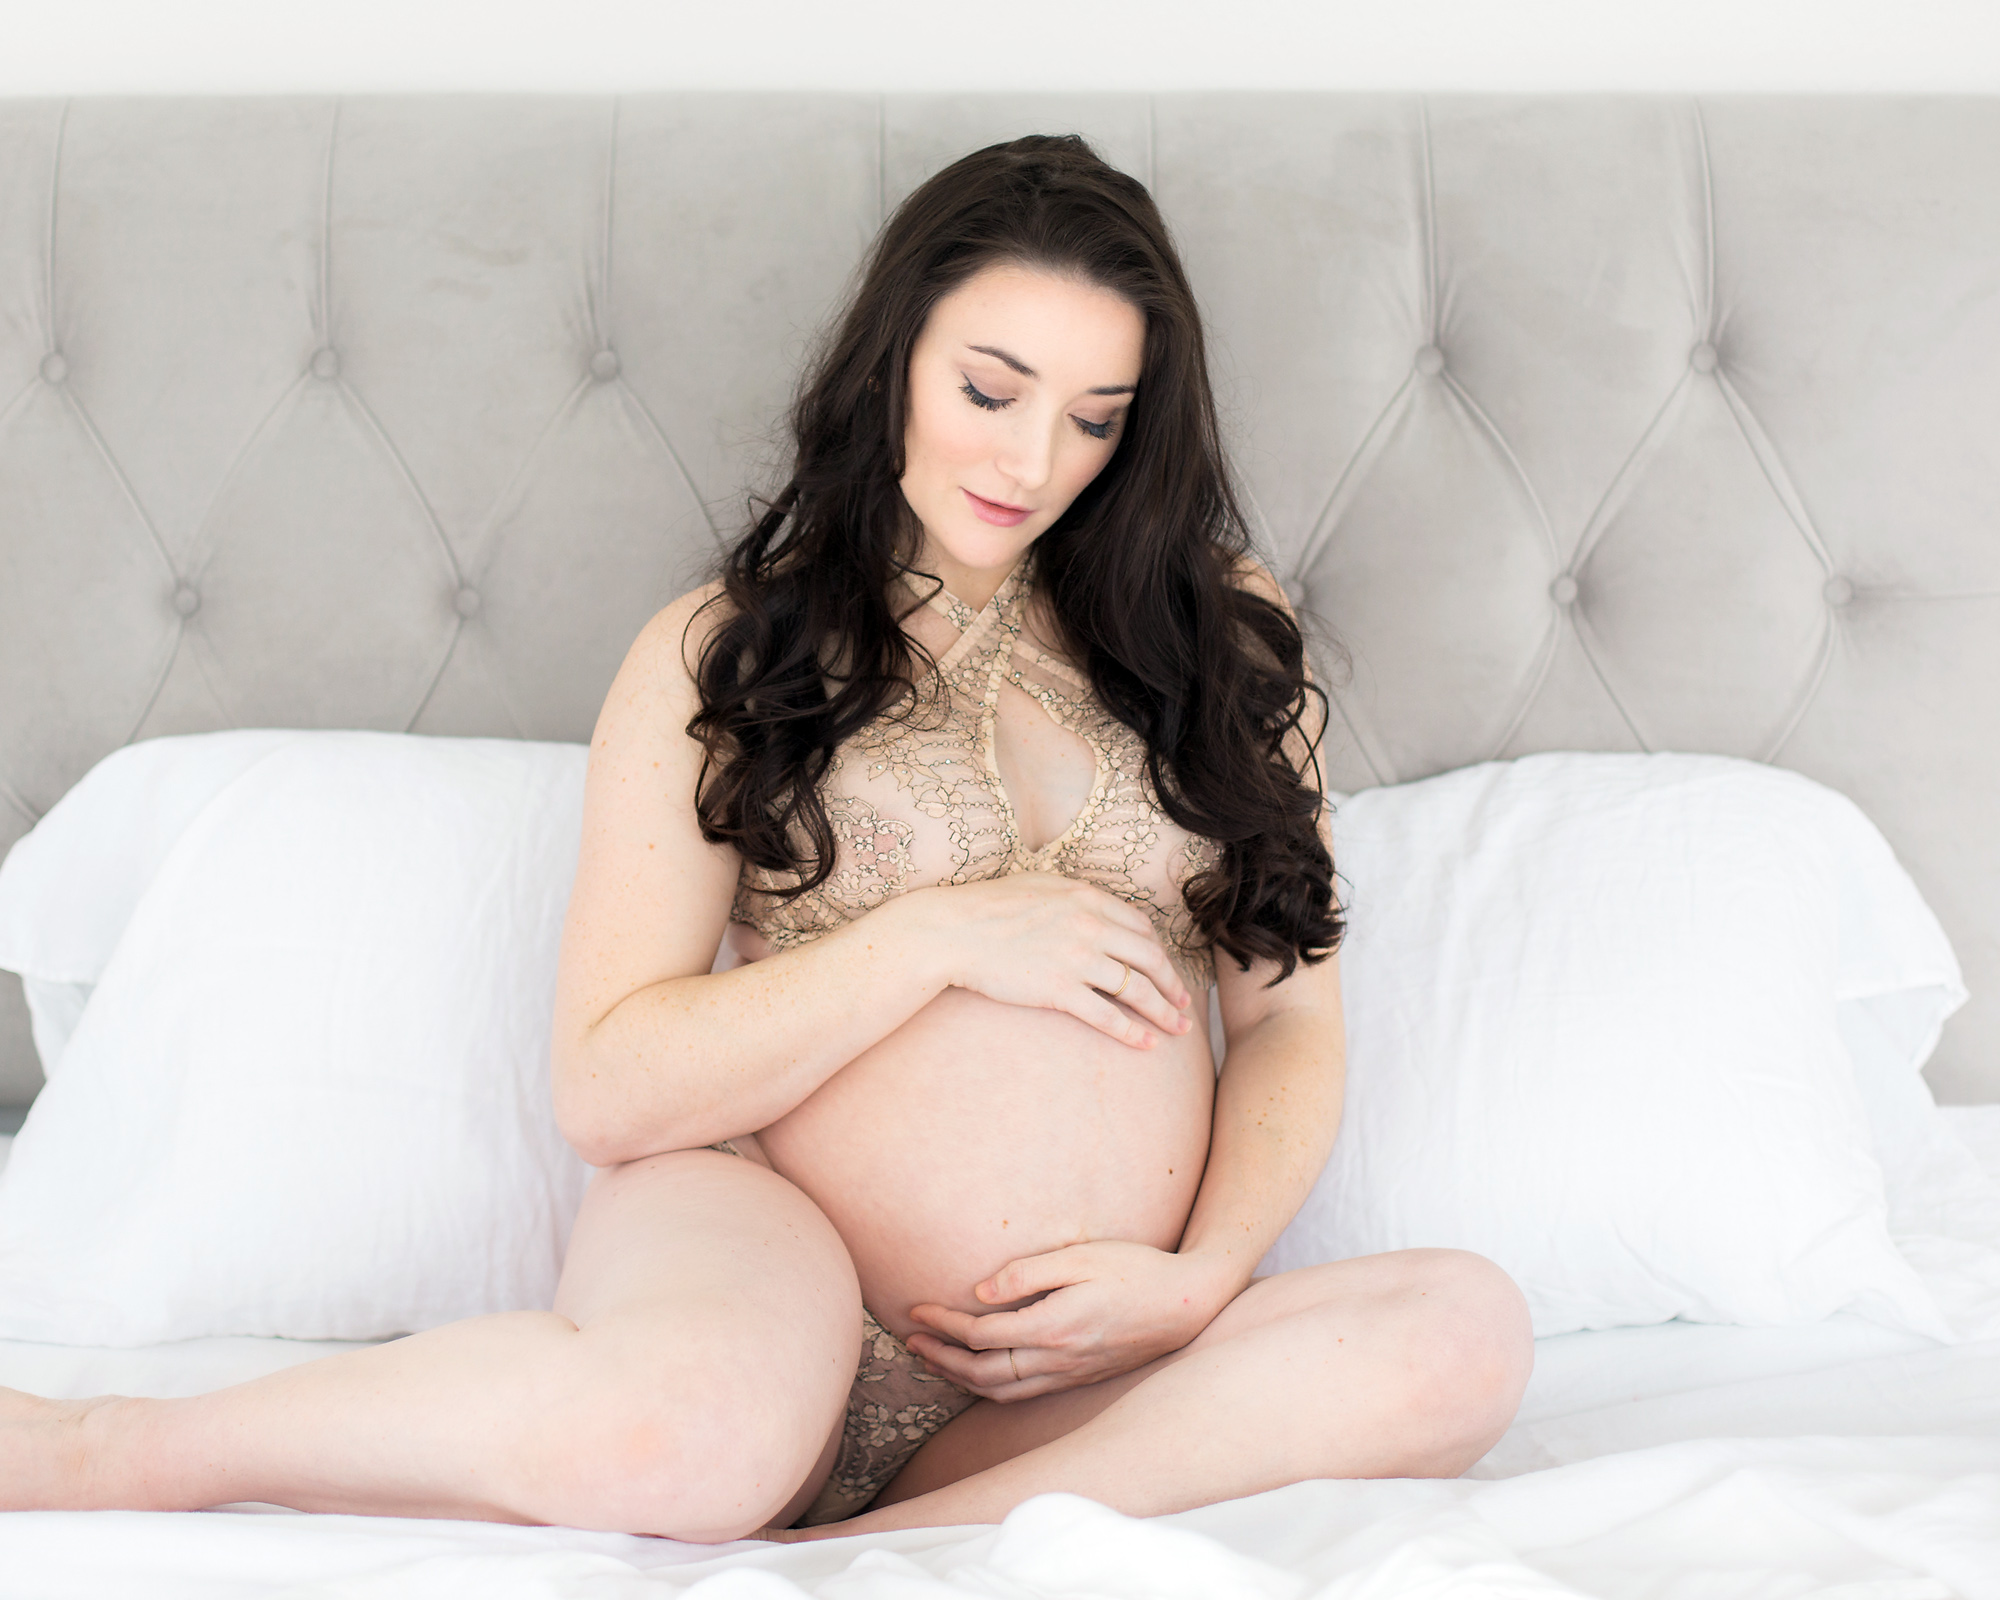 Shea Mayberry of Shea Mayberry Photography in Dallas Texas Boudoir and Photography shares an intimate maternity session. dallas maternity boudoir